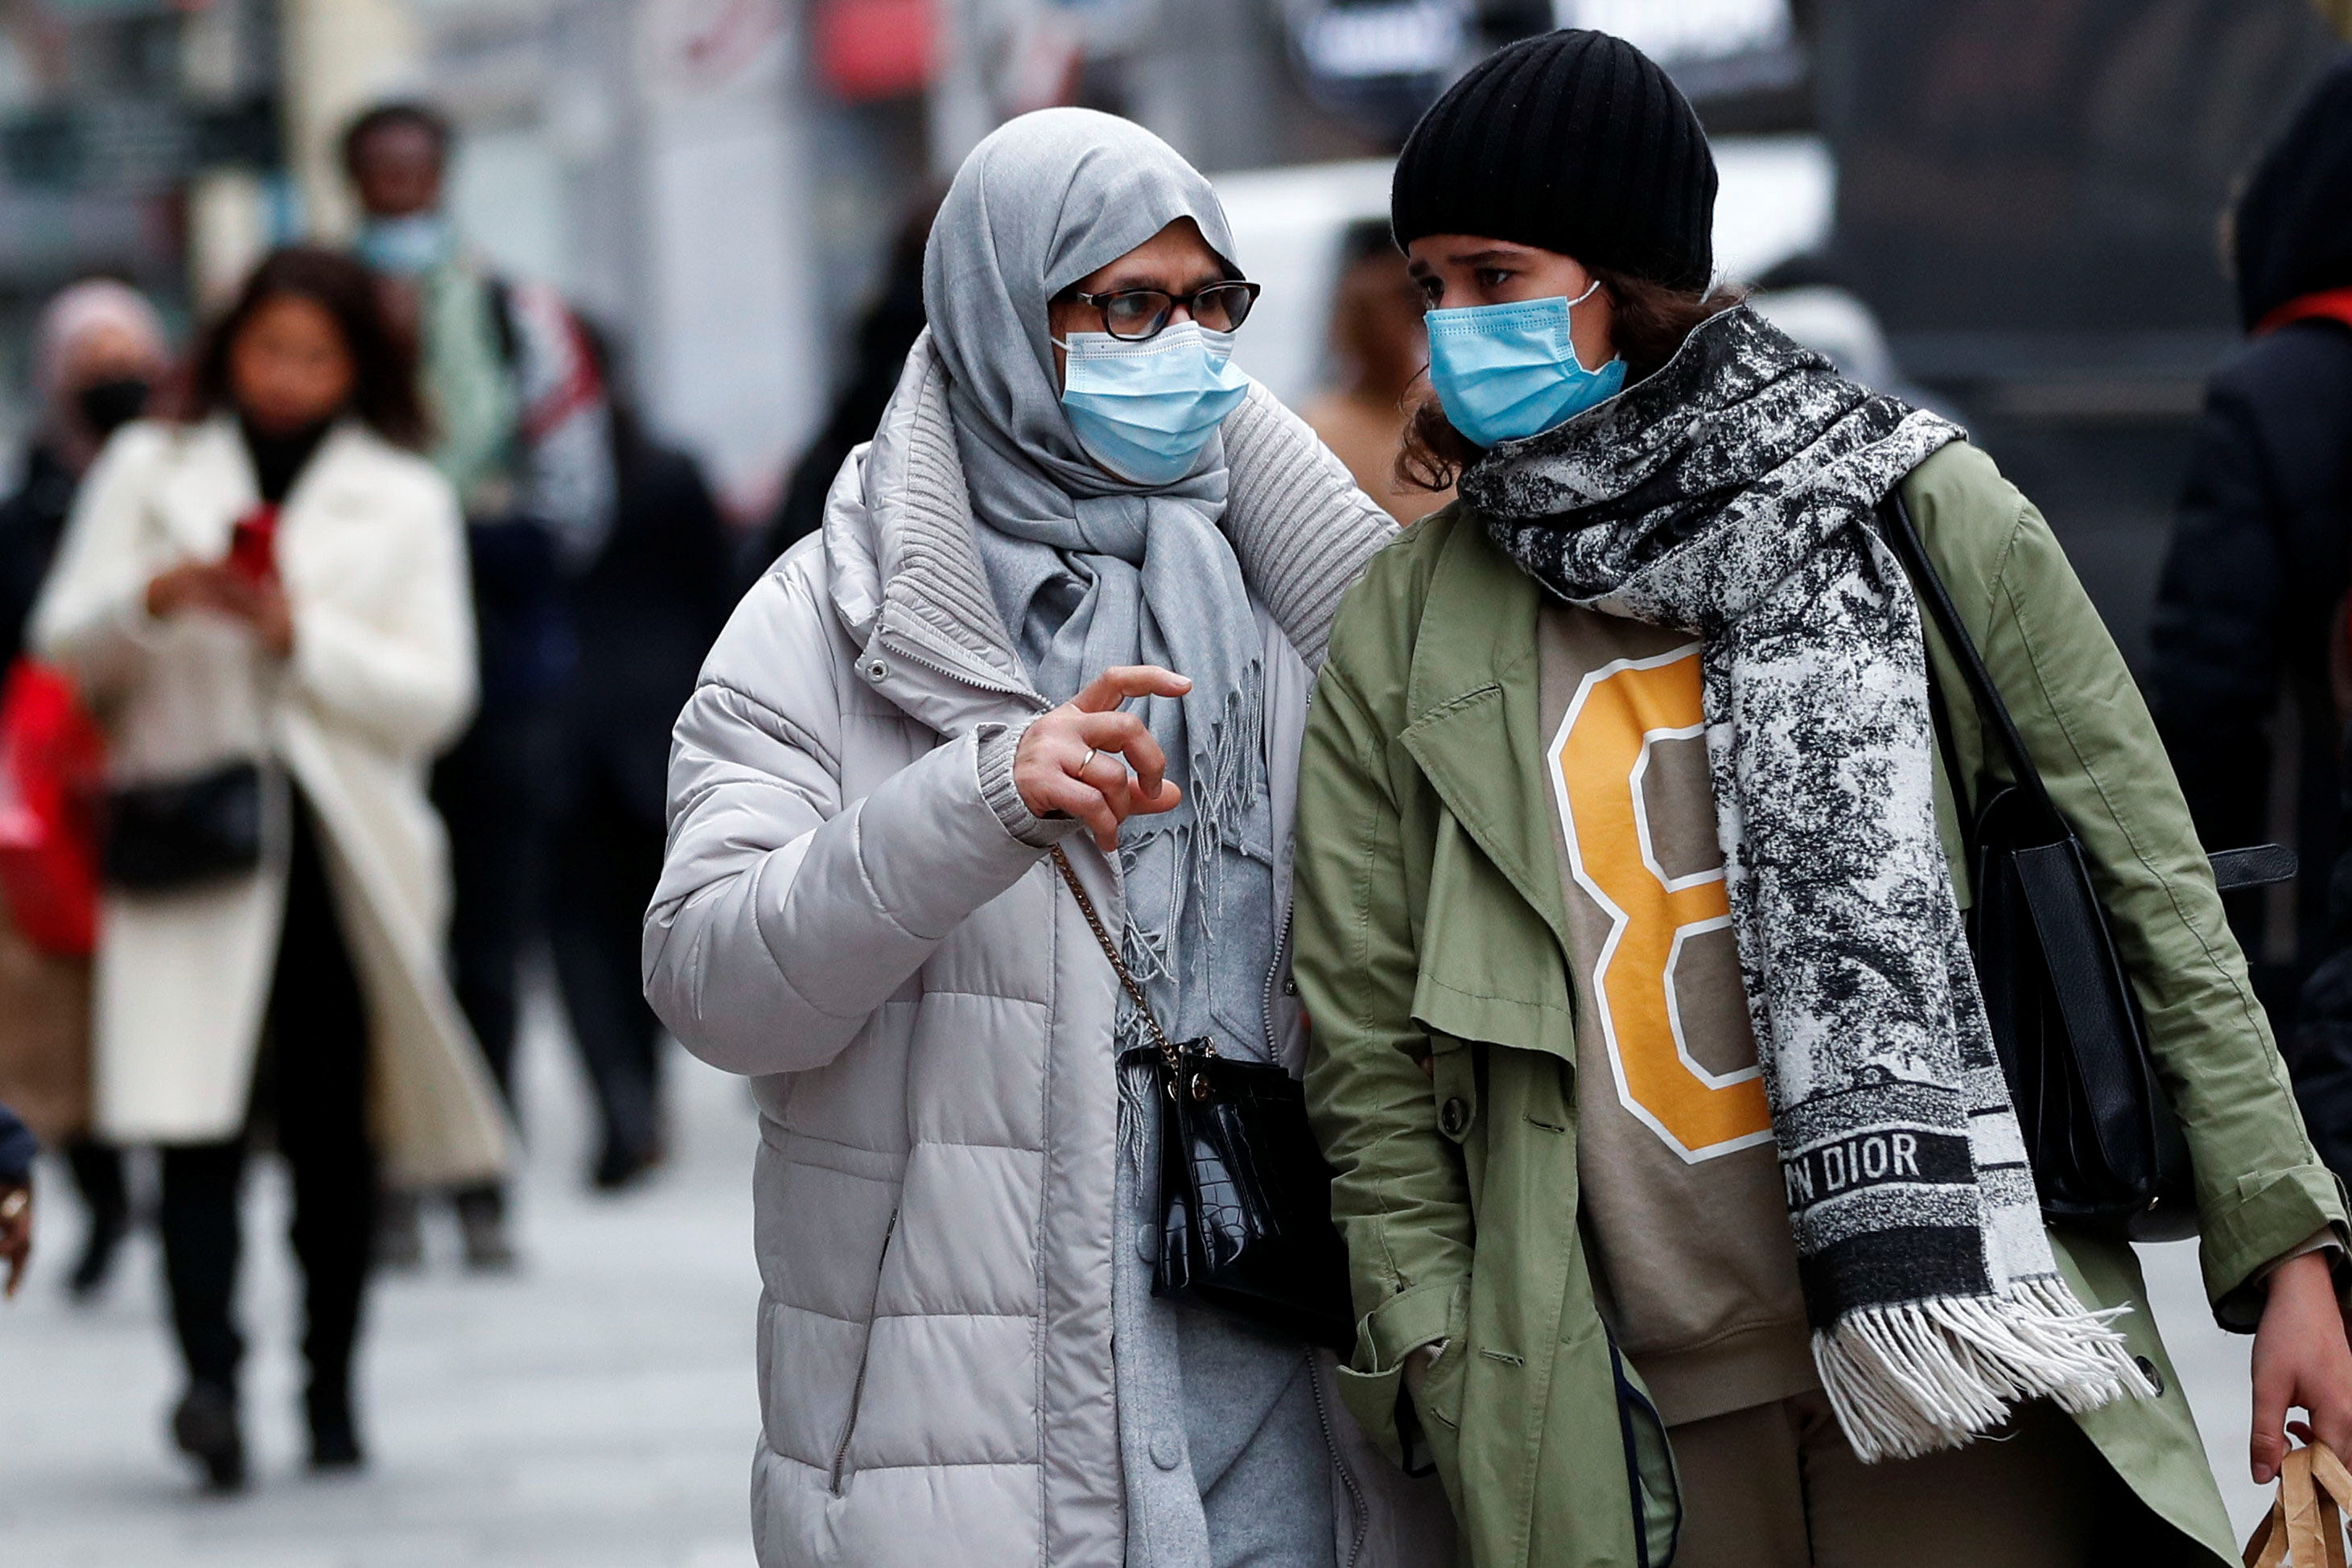 People wearing protective masks walk on a street, following the government's restrictions imposed to contain the spread of coronavirus disease (COVID-19) in Brussels, Belgium, December 3, 2021. REUTERS/ Johanna Geron